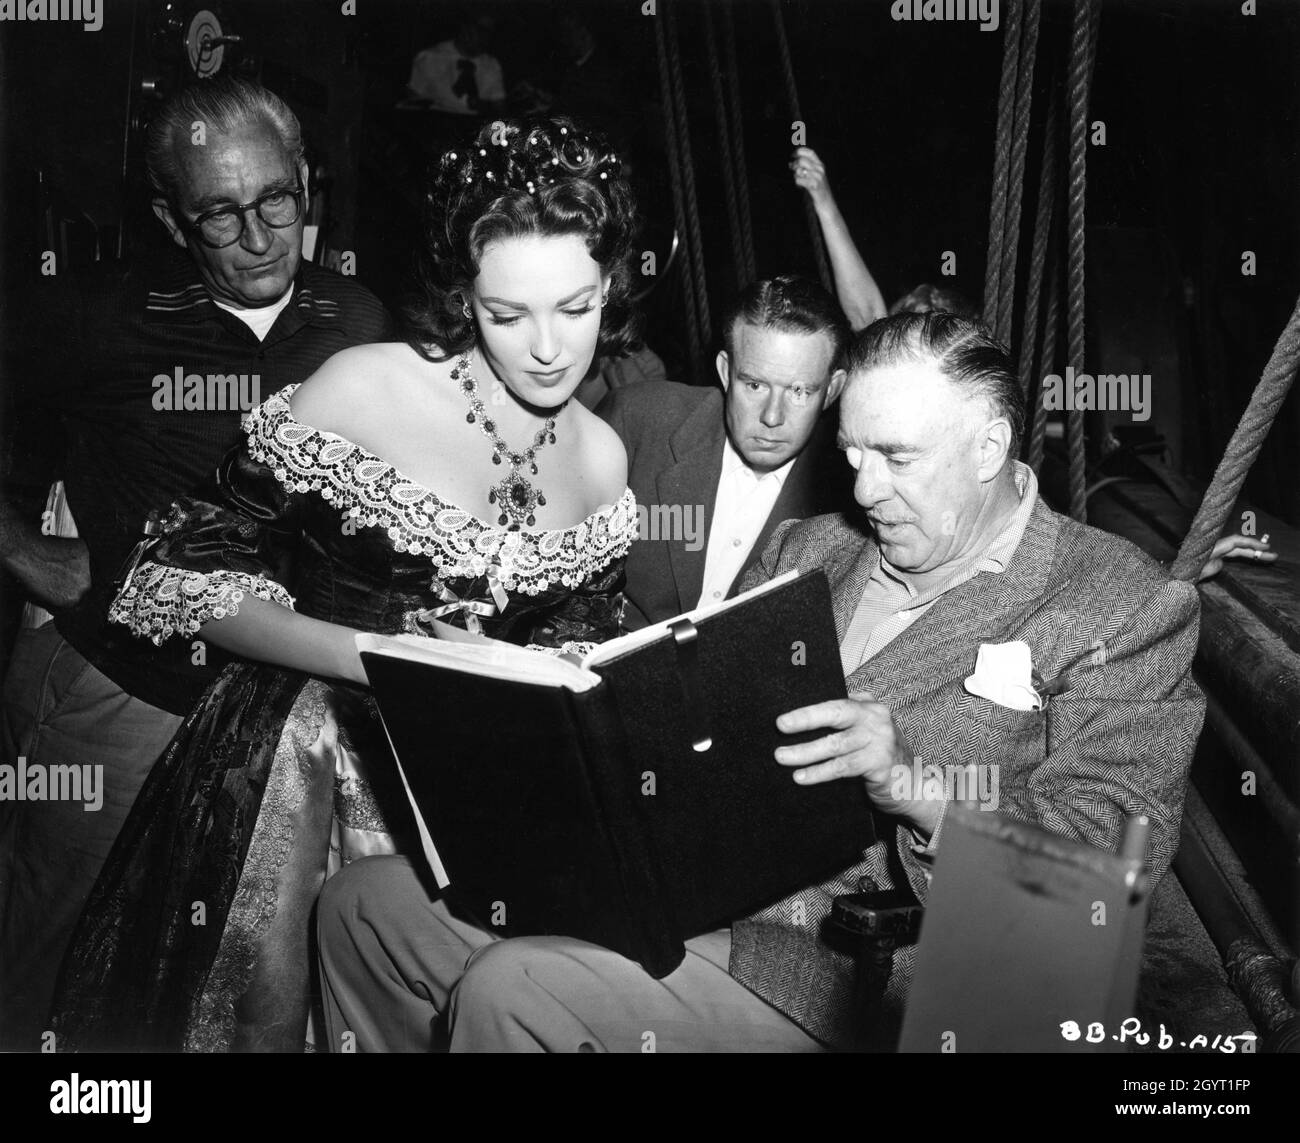 1st Assistant Director JAMES CASEY LINDA DARNELL Dialogue Director HAL LONG and Director RAOUL WALSH discuss the script on set candid during filming of BLACKBEARD THE PIRATE 1952 director RAOUL WALSH story DeVallon Scott screenplay Alan Le May costume design Michael Woulfe music Victor Young producer Edmund Grainger RKO Radio Pictures Stock Photo